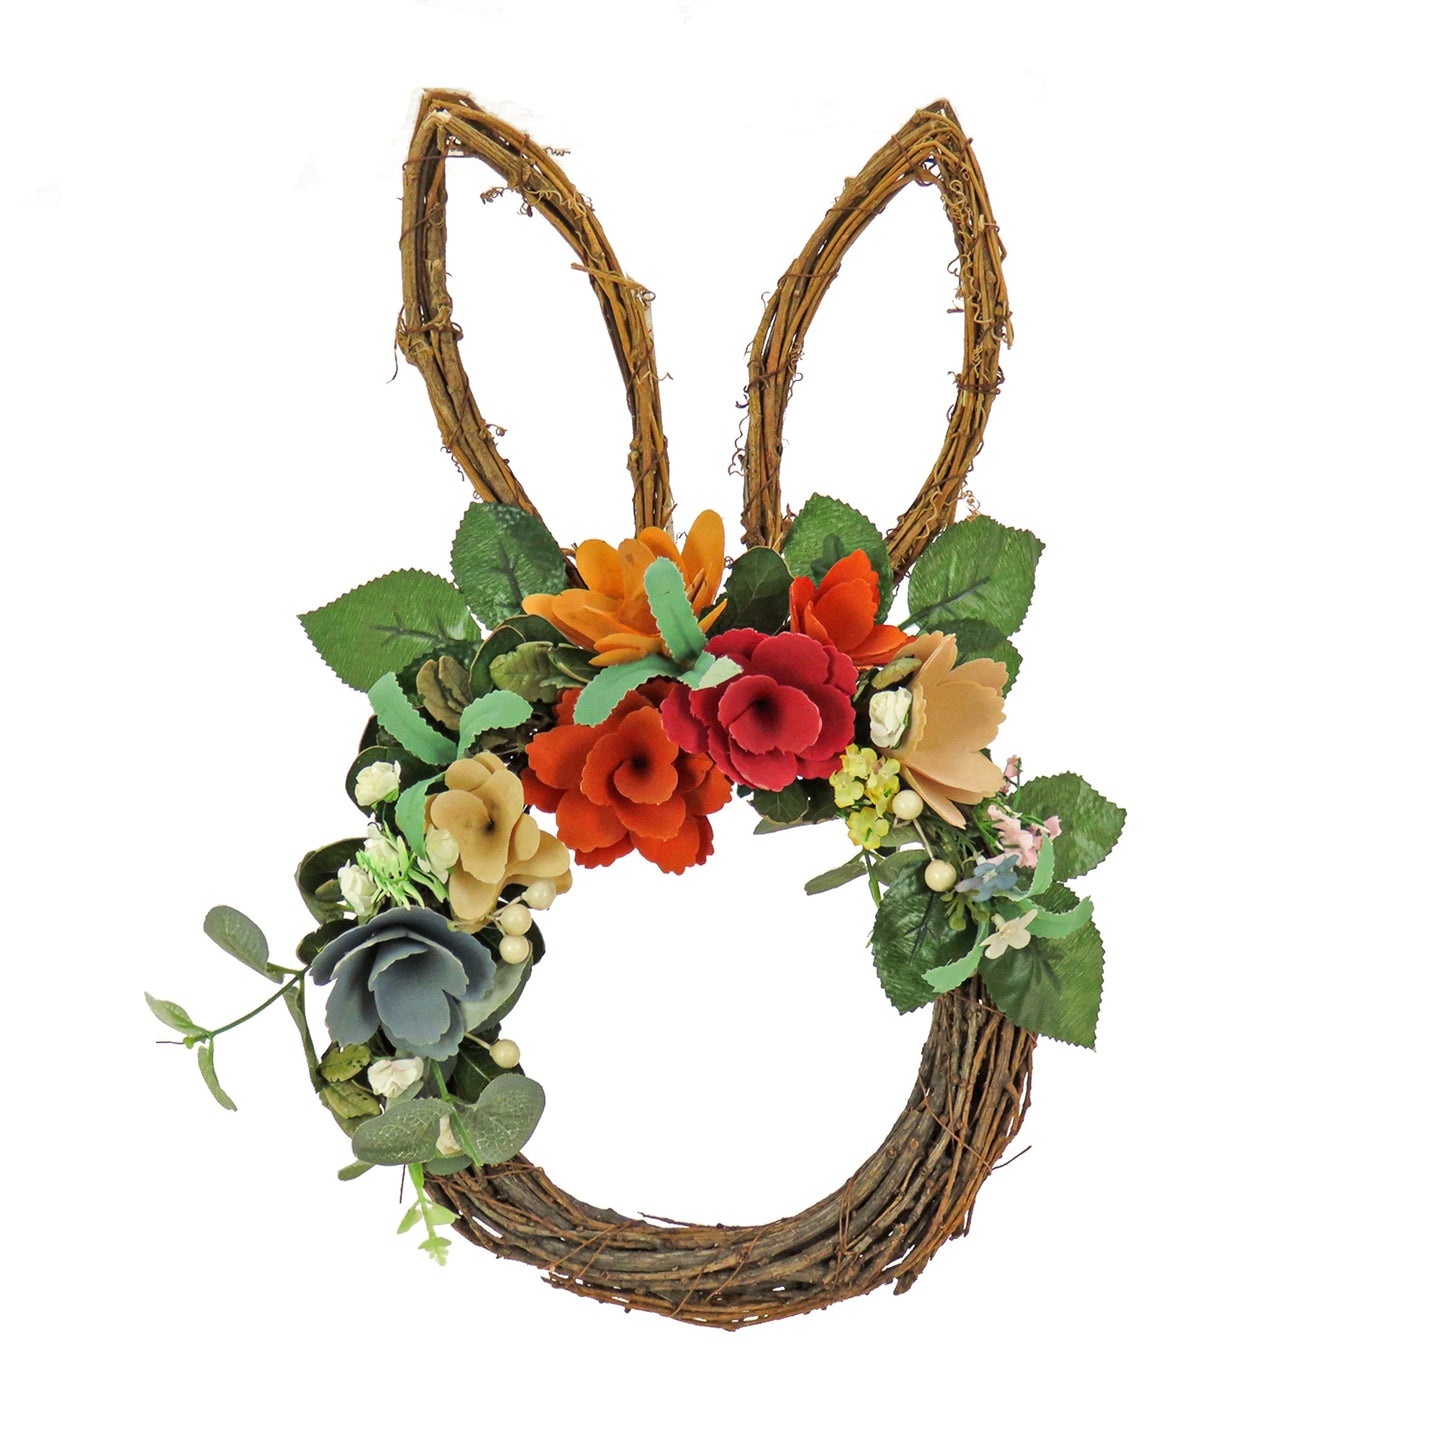 Artificial Bunny Shaped Hanging Wreath, Woven Branch Base, Decorated with Colorful Flower Blooms, Berry Clusters, Leafy Greens, Easter Collection, 17 Inches